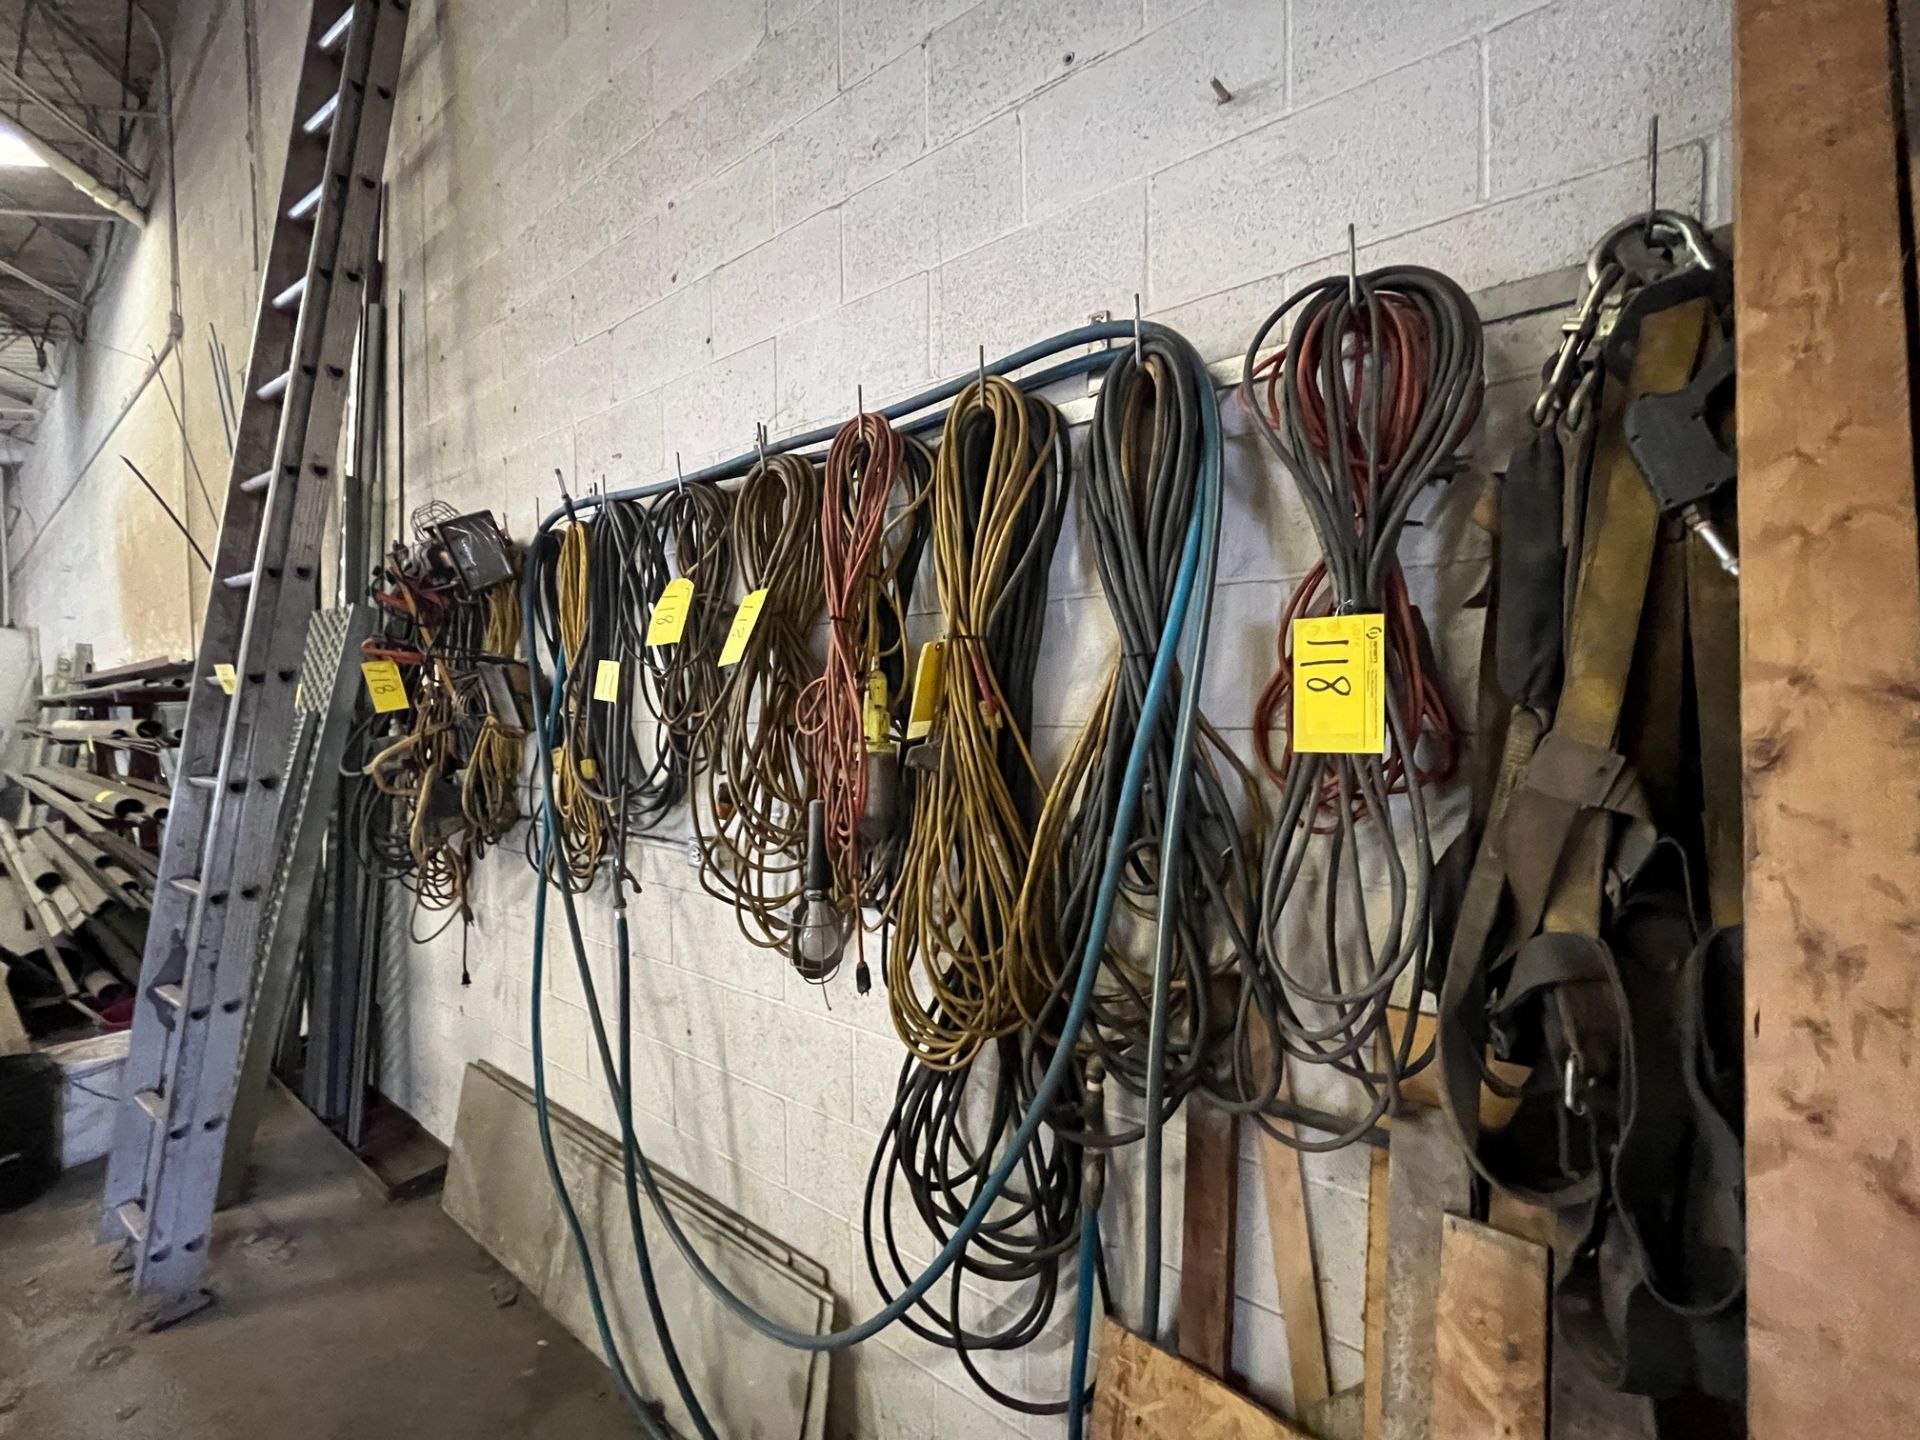 LOT OF HANGING EXTENSION CORDS AND RACK - Image 2 of 3